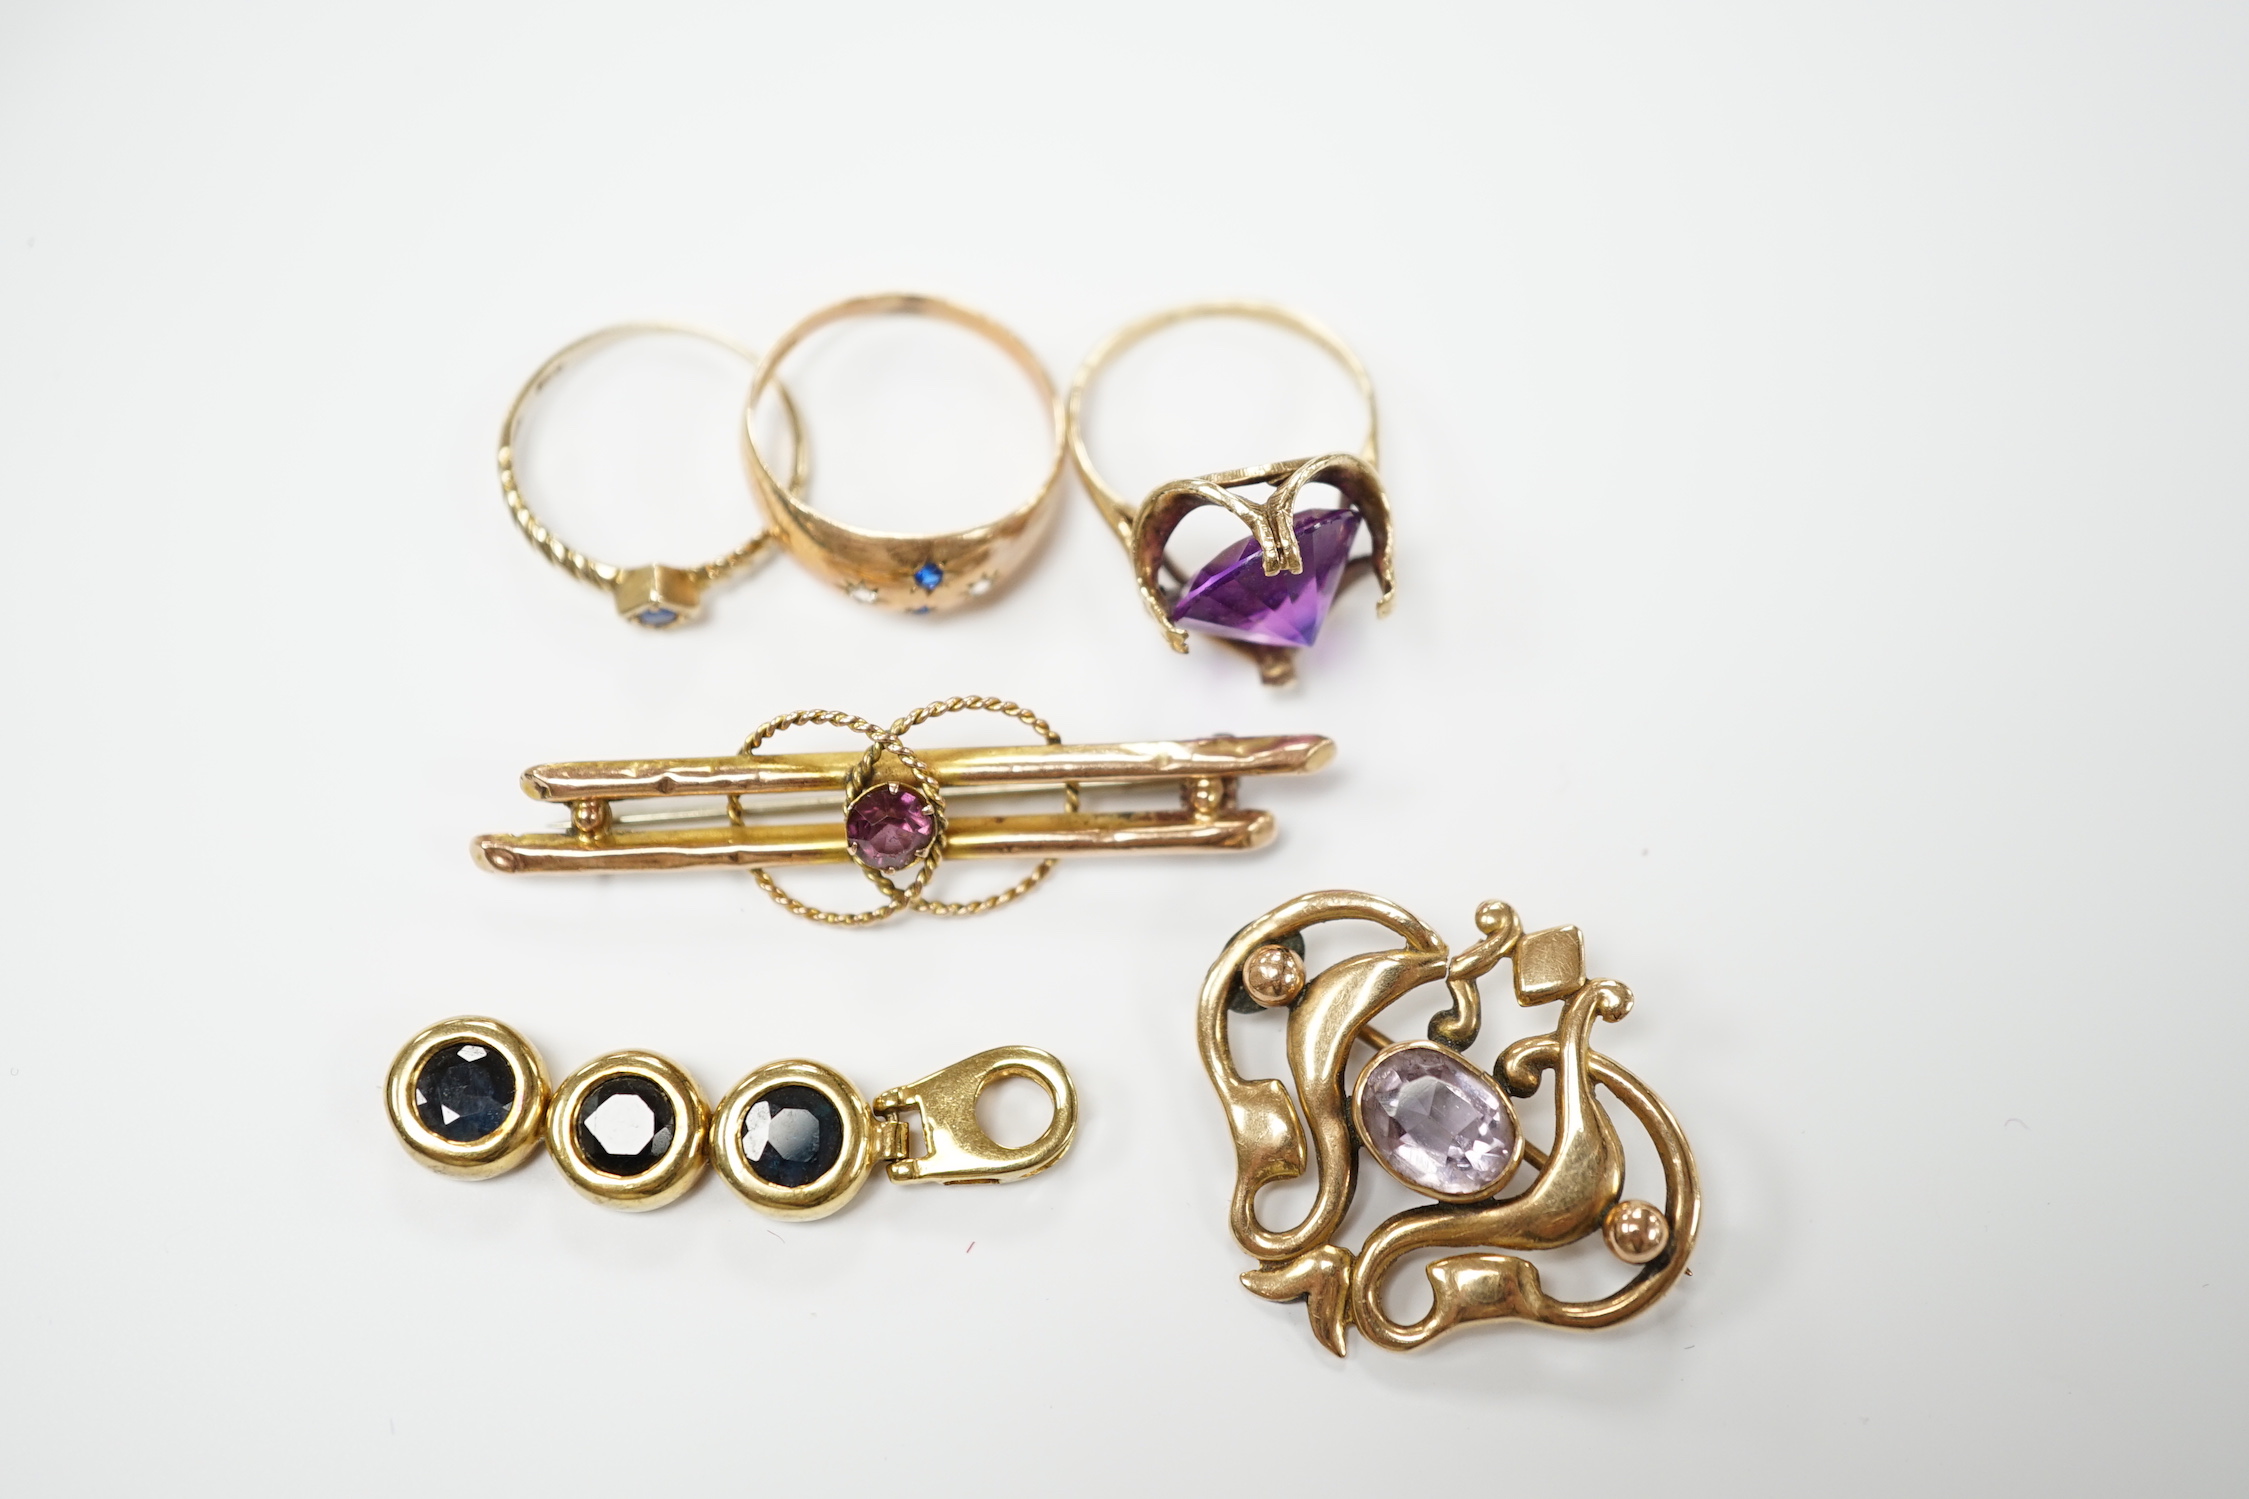 Six items of assorted jewellery including three 9ct and gem set rings, an Edwardian 9ct and amethyst set brooch, a 9ct and gem set bar brooch and a 9ct and gem set drop pendant, gross weight 15.5 grams.